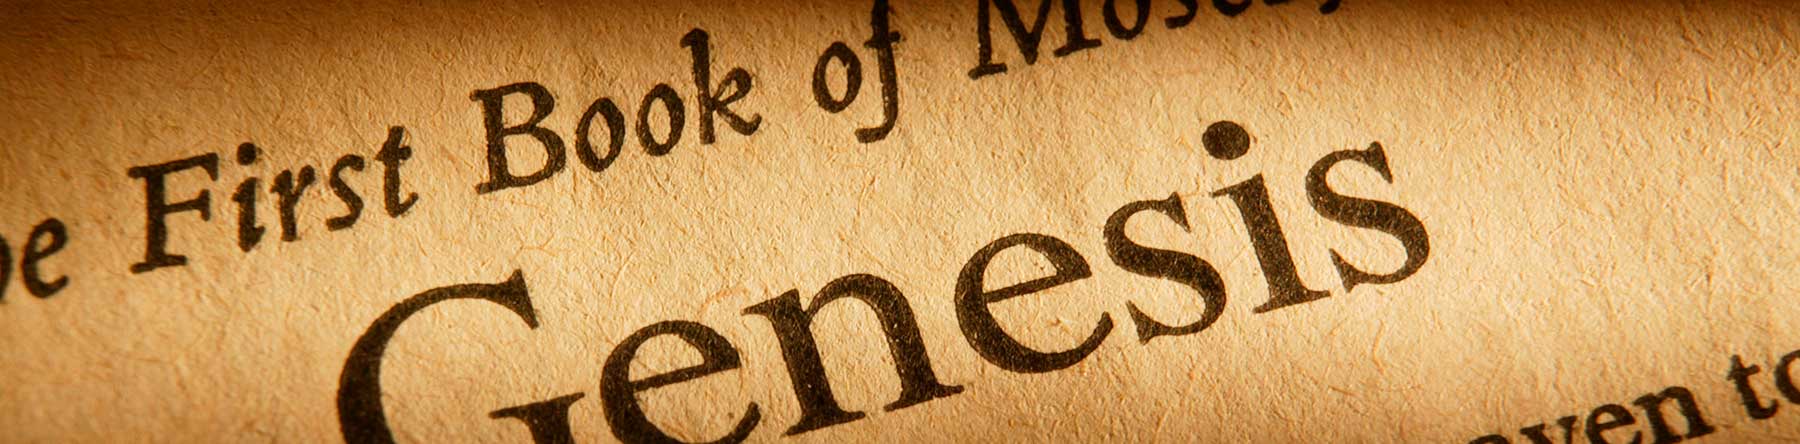 Science Shepherd Christian Homeschool Curriculum Blog banner showing Genesis page from the Bible